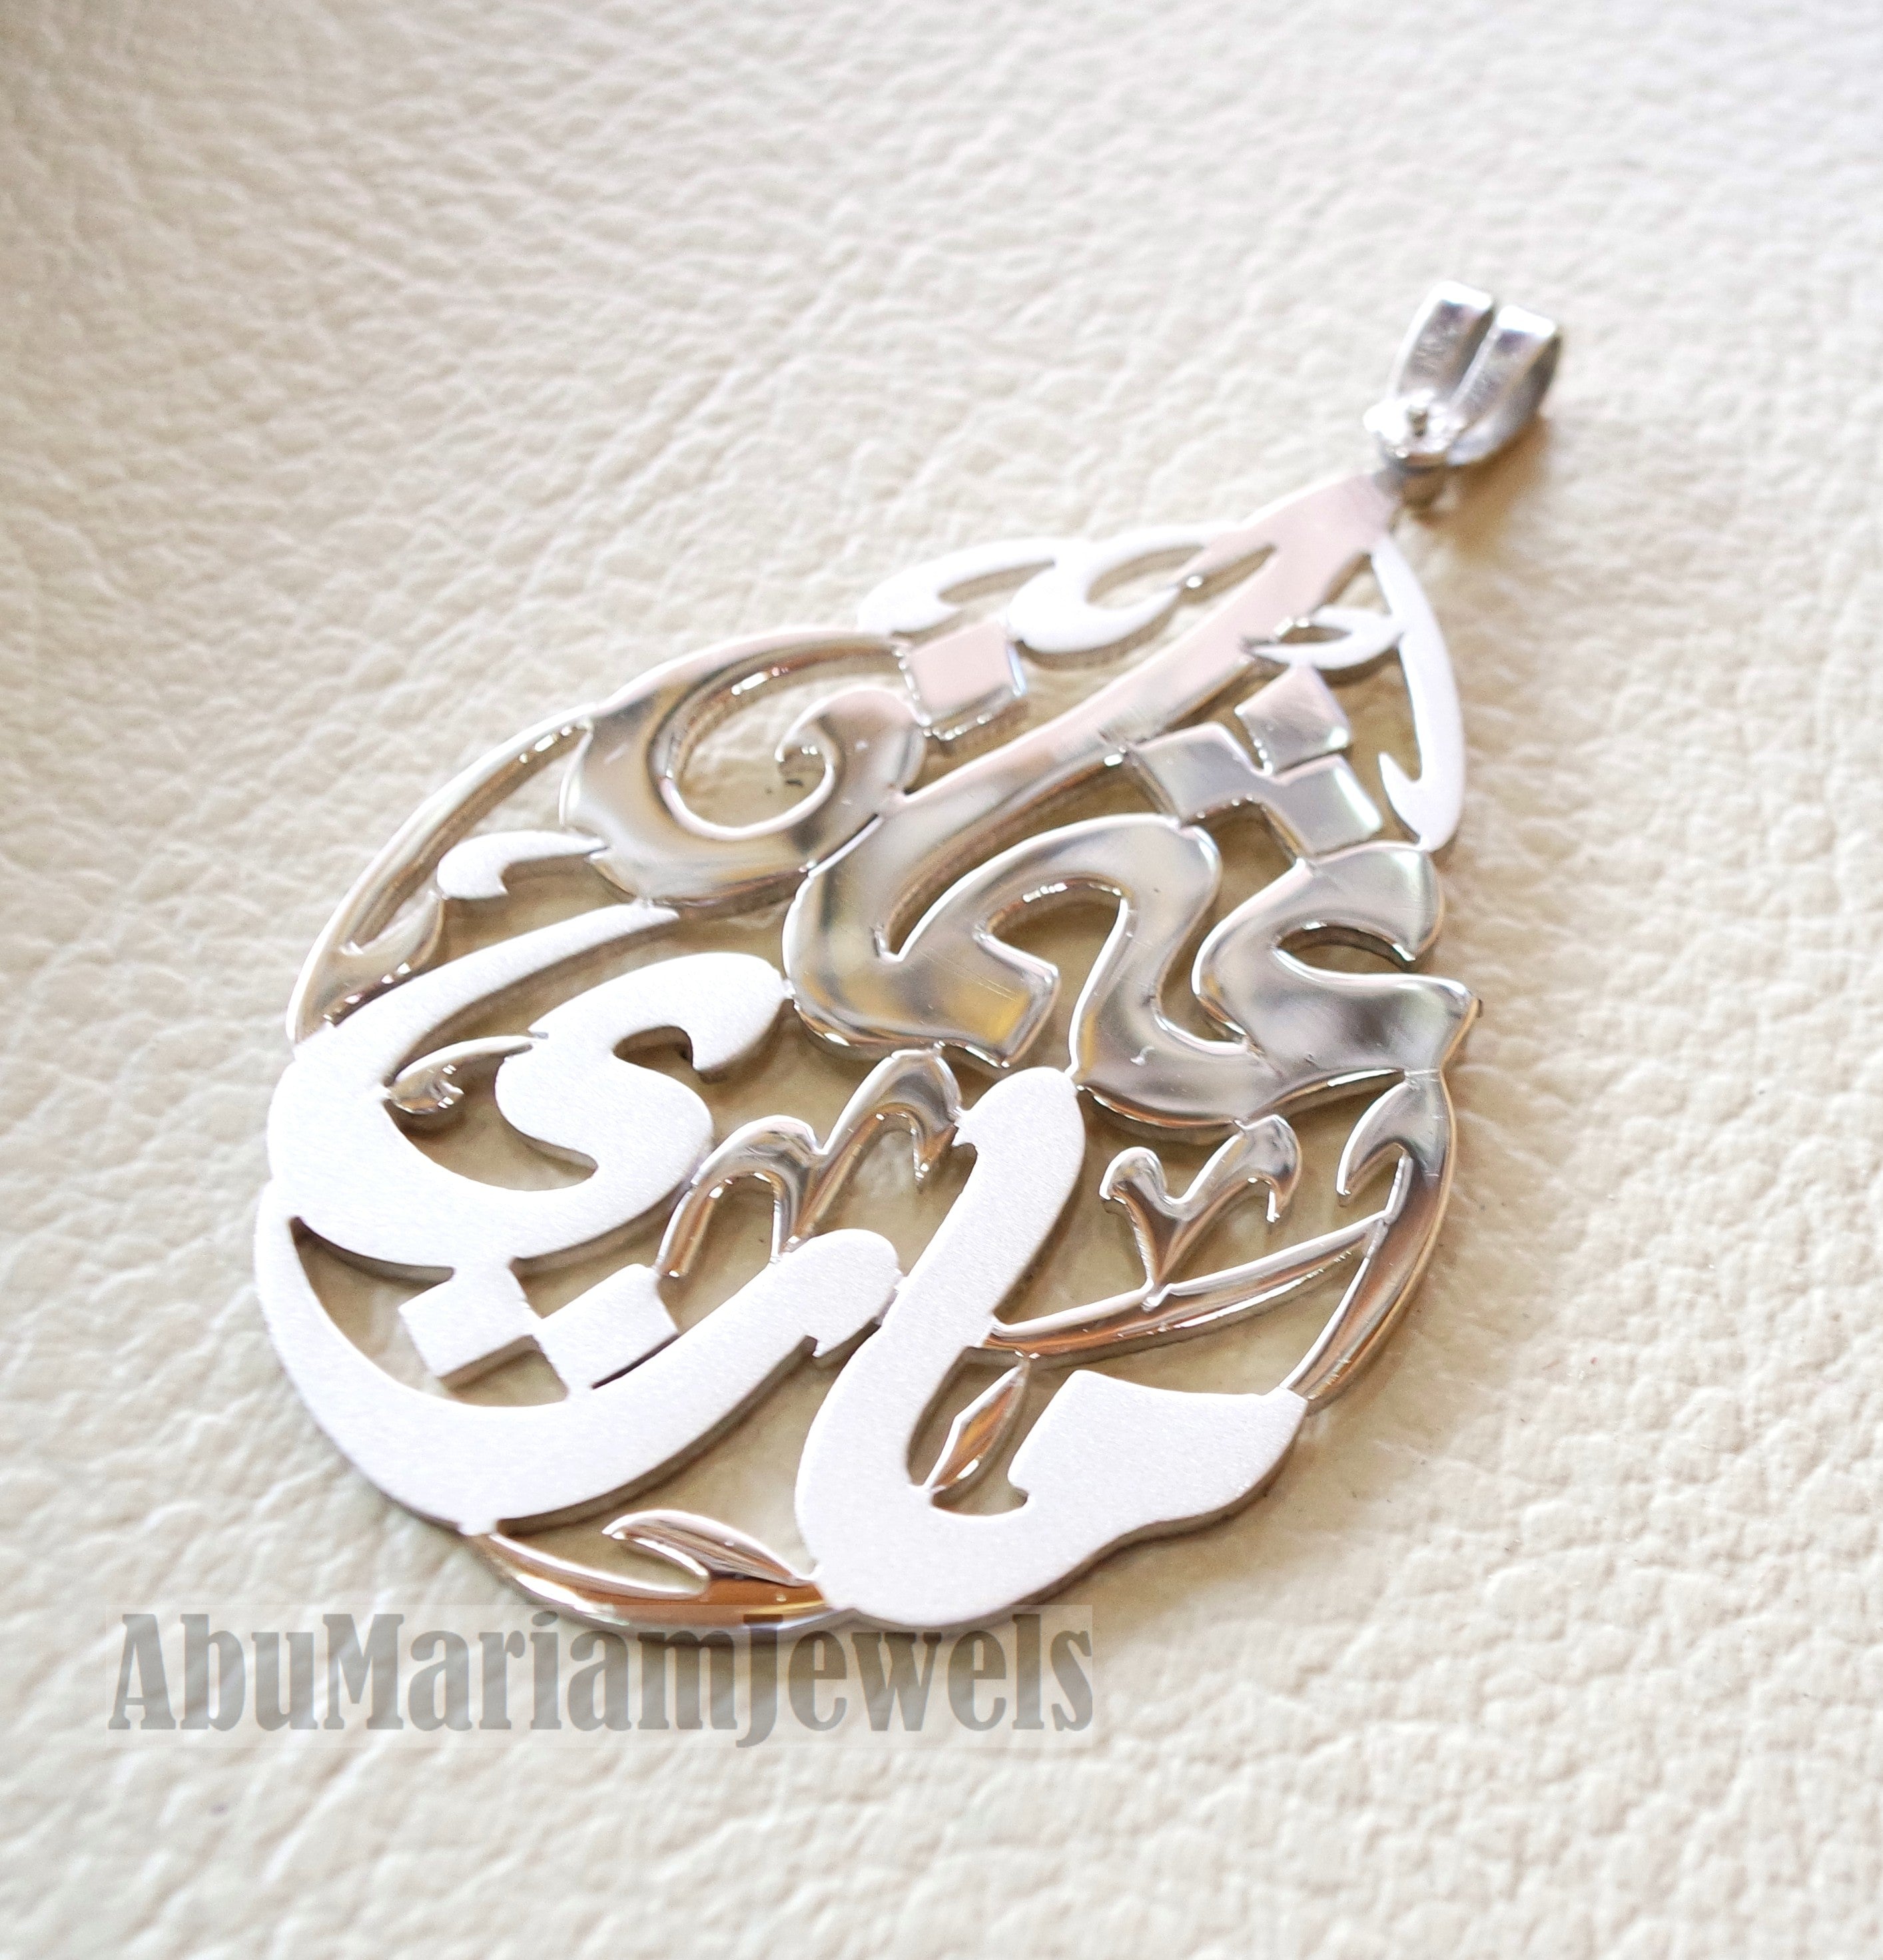 Personalized pendant any two names arabic customized name sterling silver 925 high quality polishing big size pear shape تعليقه اسماء عربي